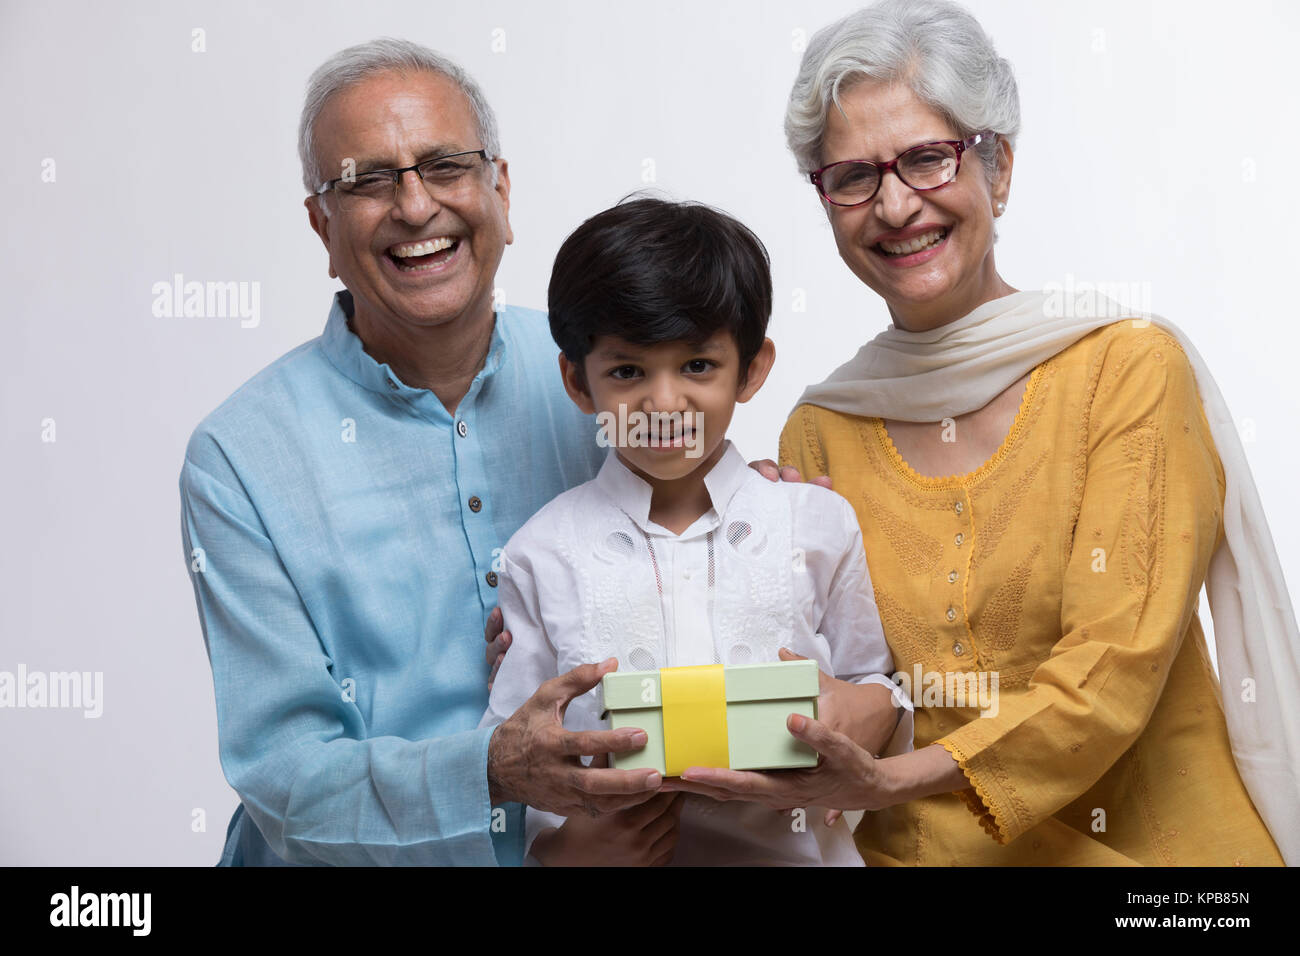 Grandparents and grandson holding gift Stock Photo